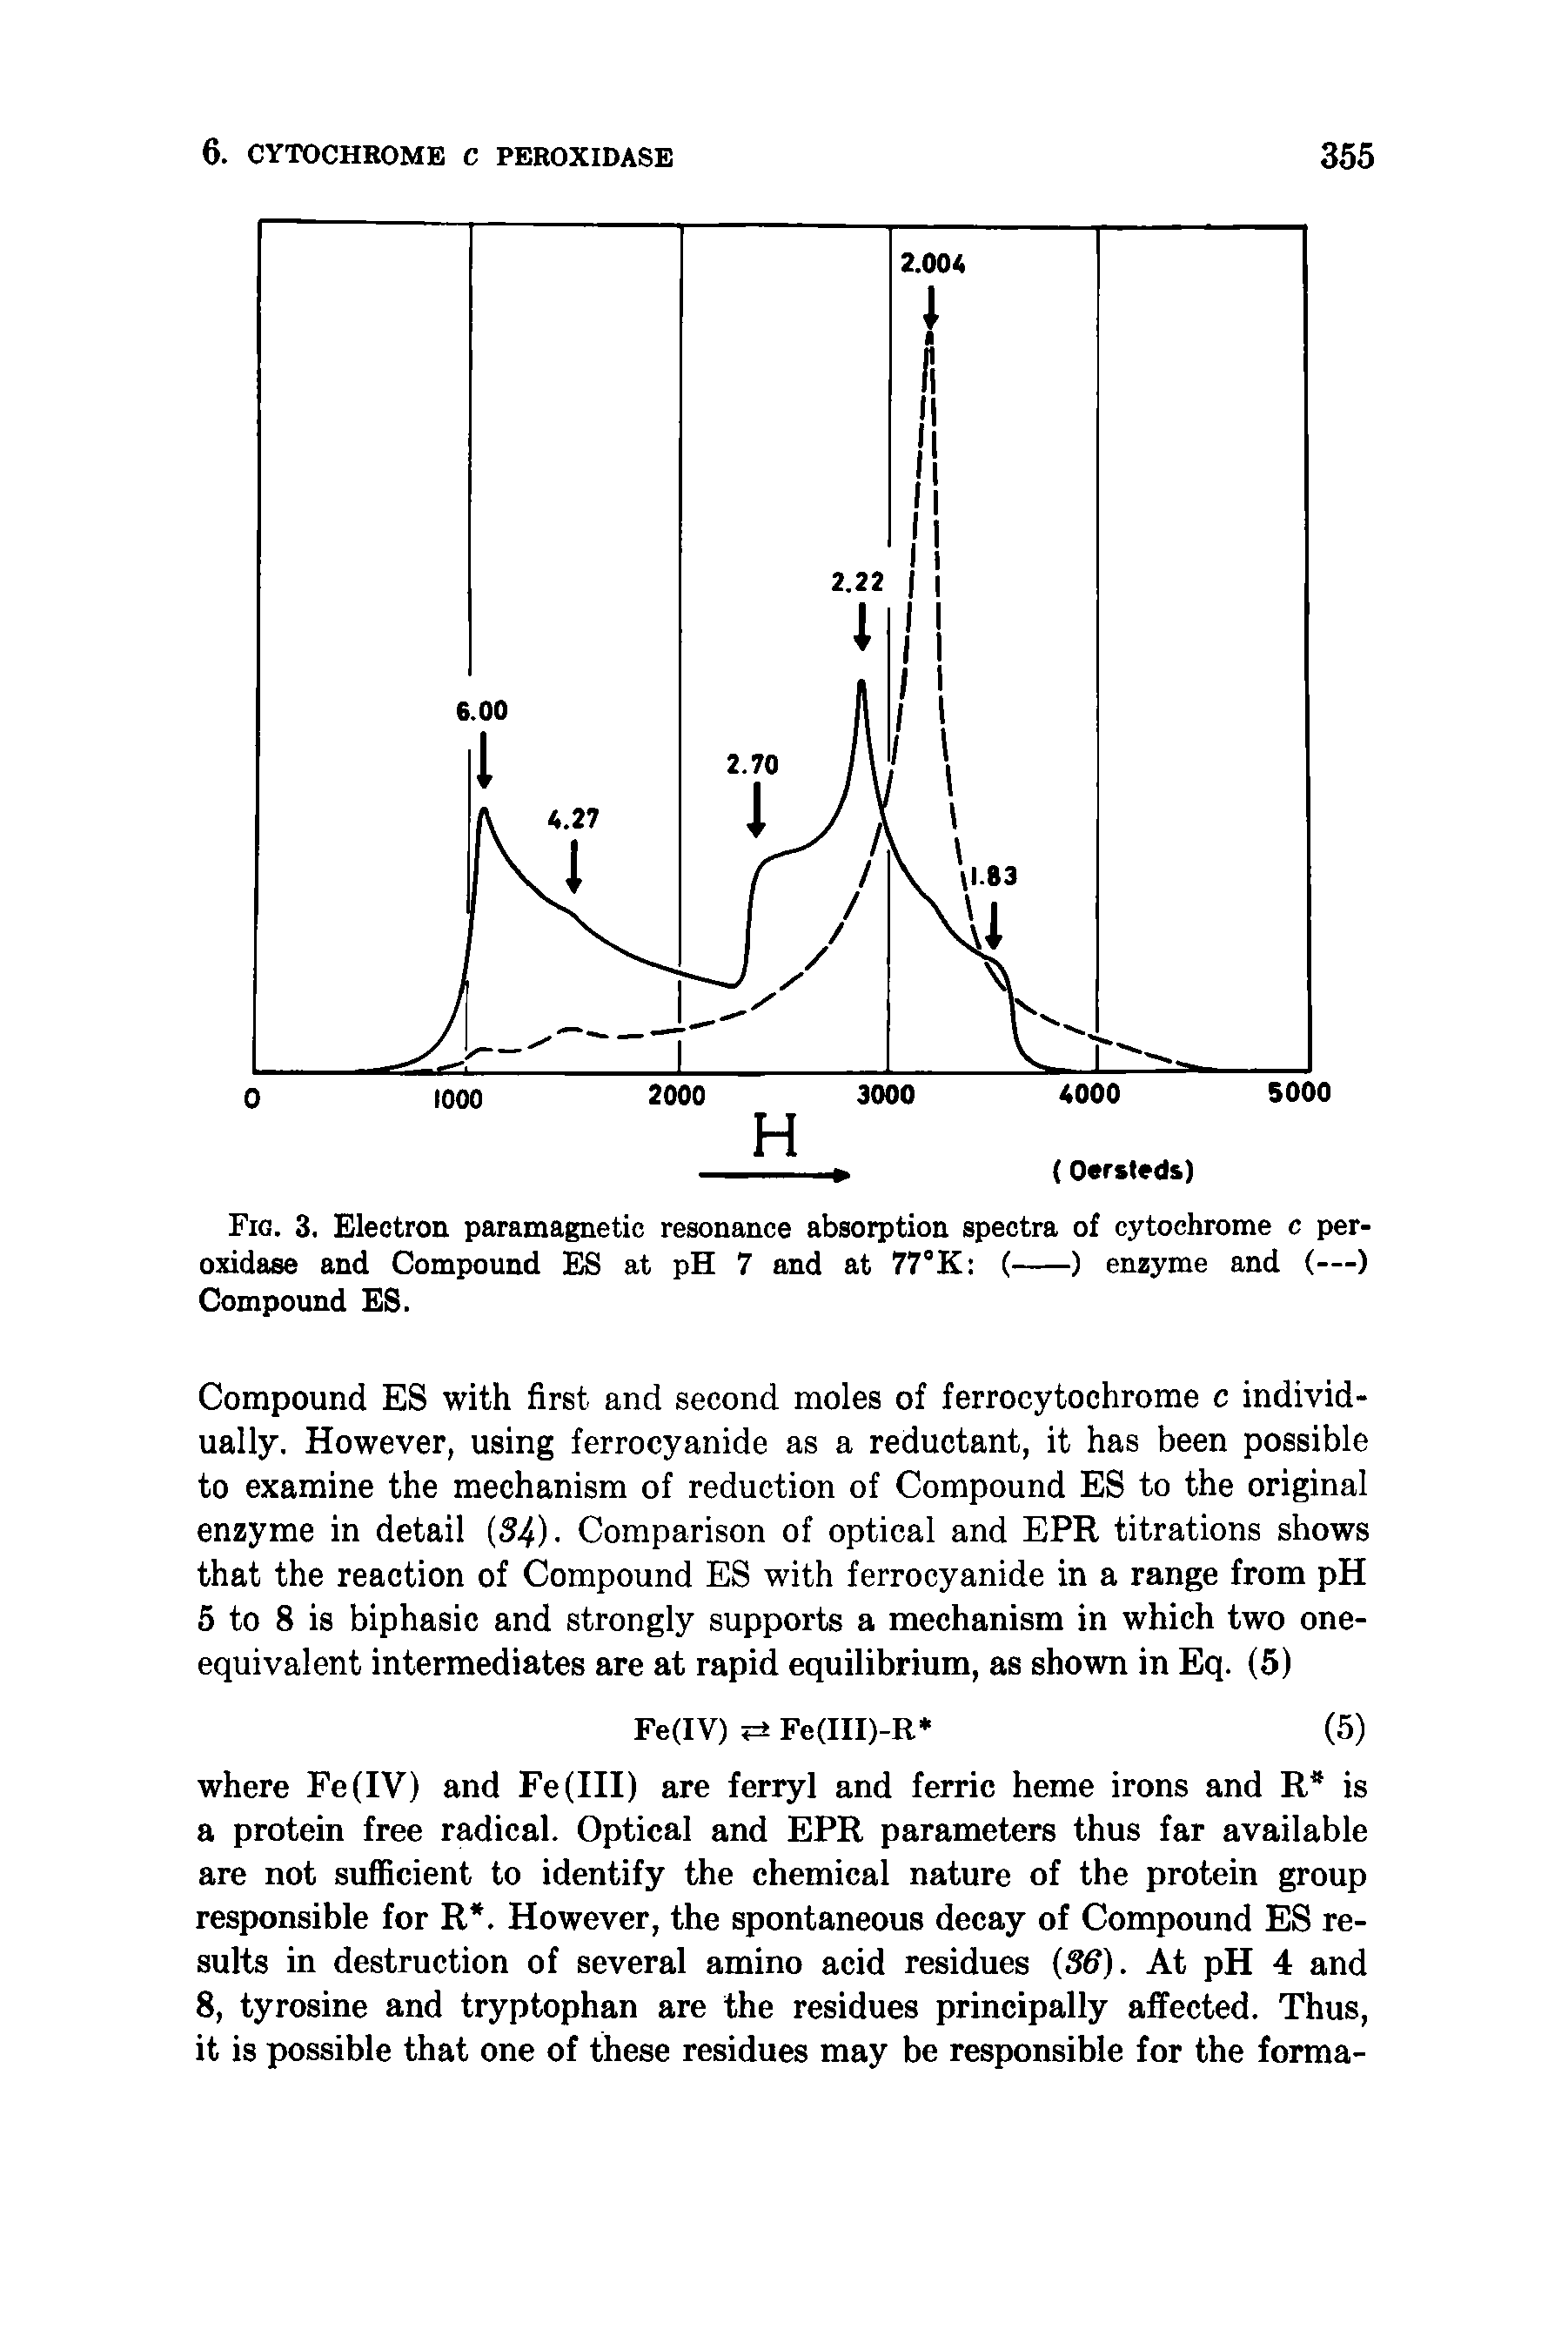 Fig. 3. Electron paramagnetic resonance absorption spectra of cytochrome c peroxidase and Compound ES at pH 7 and at 77°K (-------) enzyme and (—)...